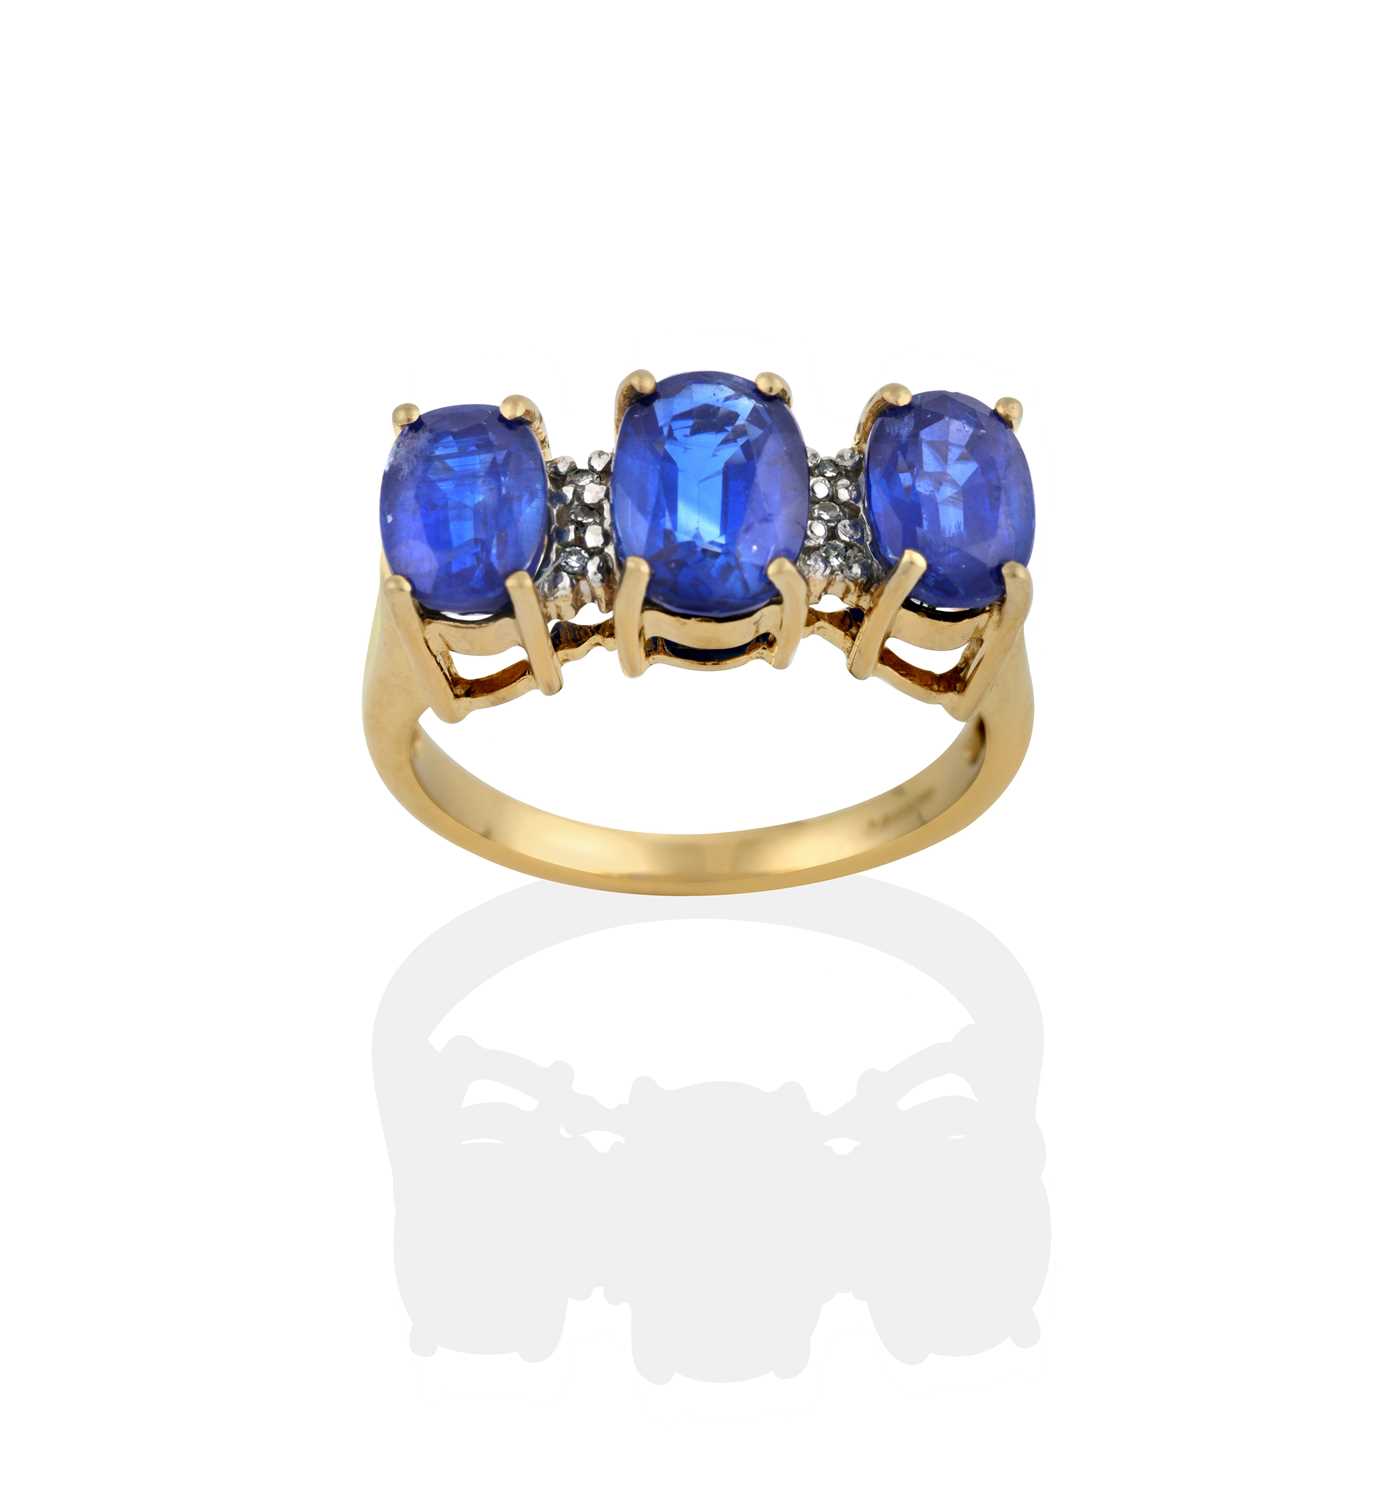 Lot 2381 - A 9 Carat Gold Sapphire and Diamond Ring